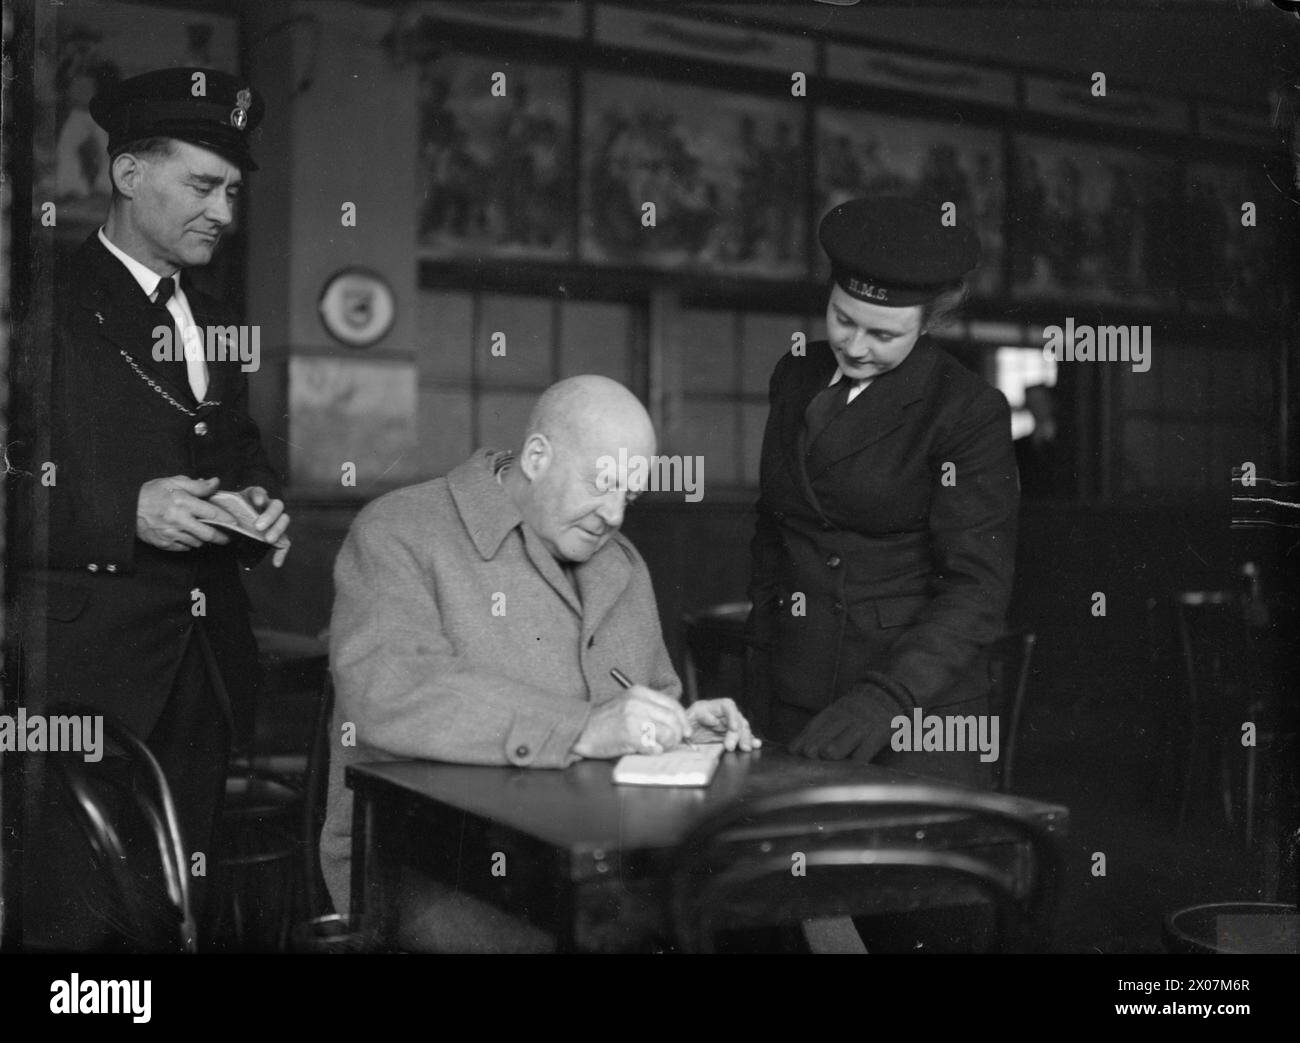 HIGH COMMISSIONER FOR SOUTH AFRICA VISITS SCOTTISH SHIPYARDS. 7 APRIL 1943, GLASGOW, COLONEL DENEYS REITZ, HIGH COMMISSIONER FOR SOUTH AFRICA IN BRITAIN, HAS COMPLETED A TWO-DAYS' TOUR OF SHIPBUILDING AND NAVAL REPAIR YARDS IN SCOTLAND. - Colonel Reitz signing his autograph for a Wren Stock Photo